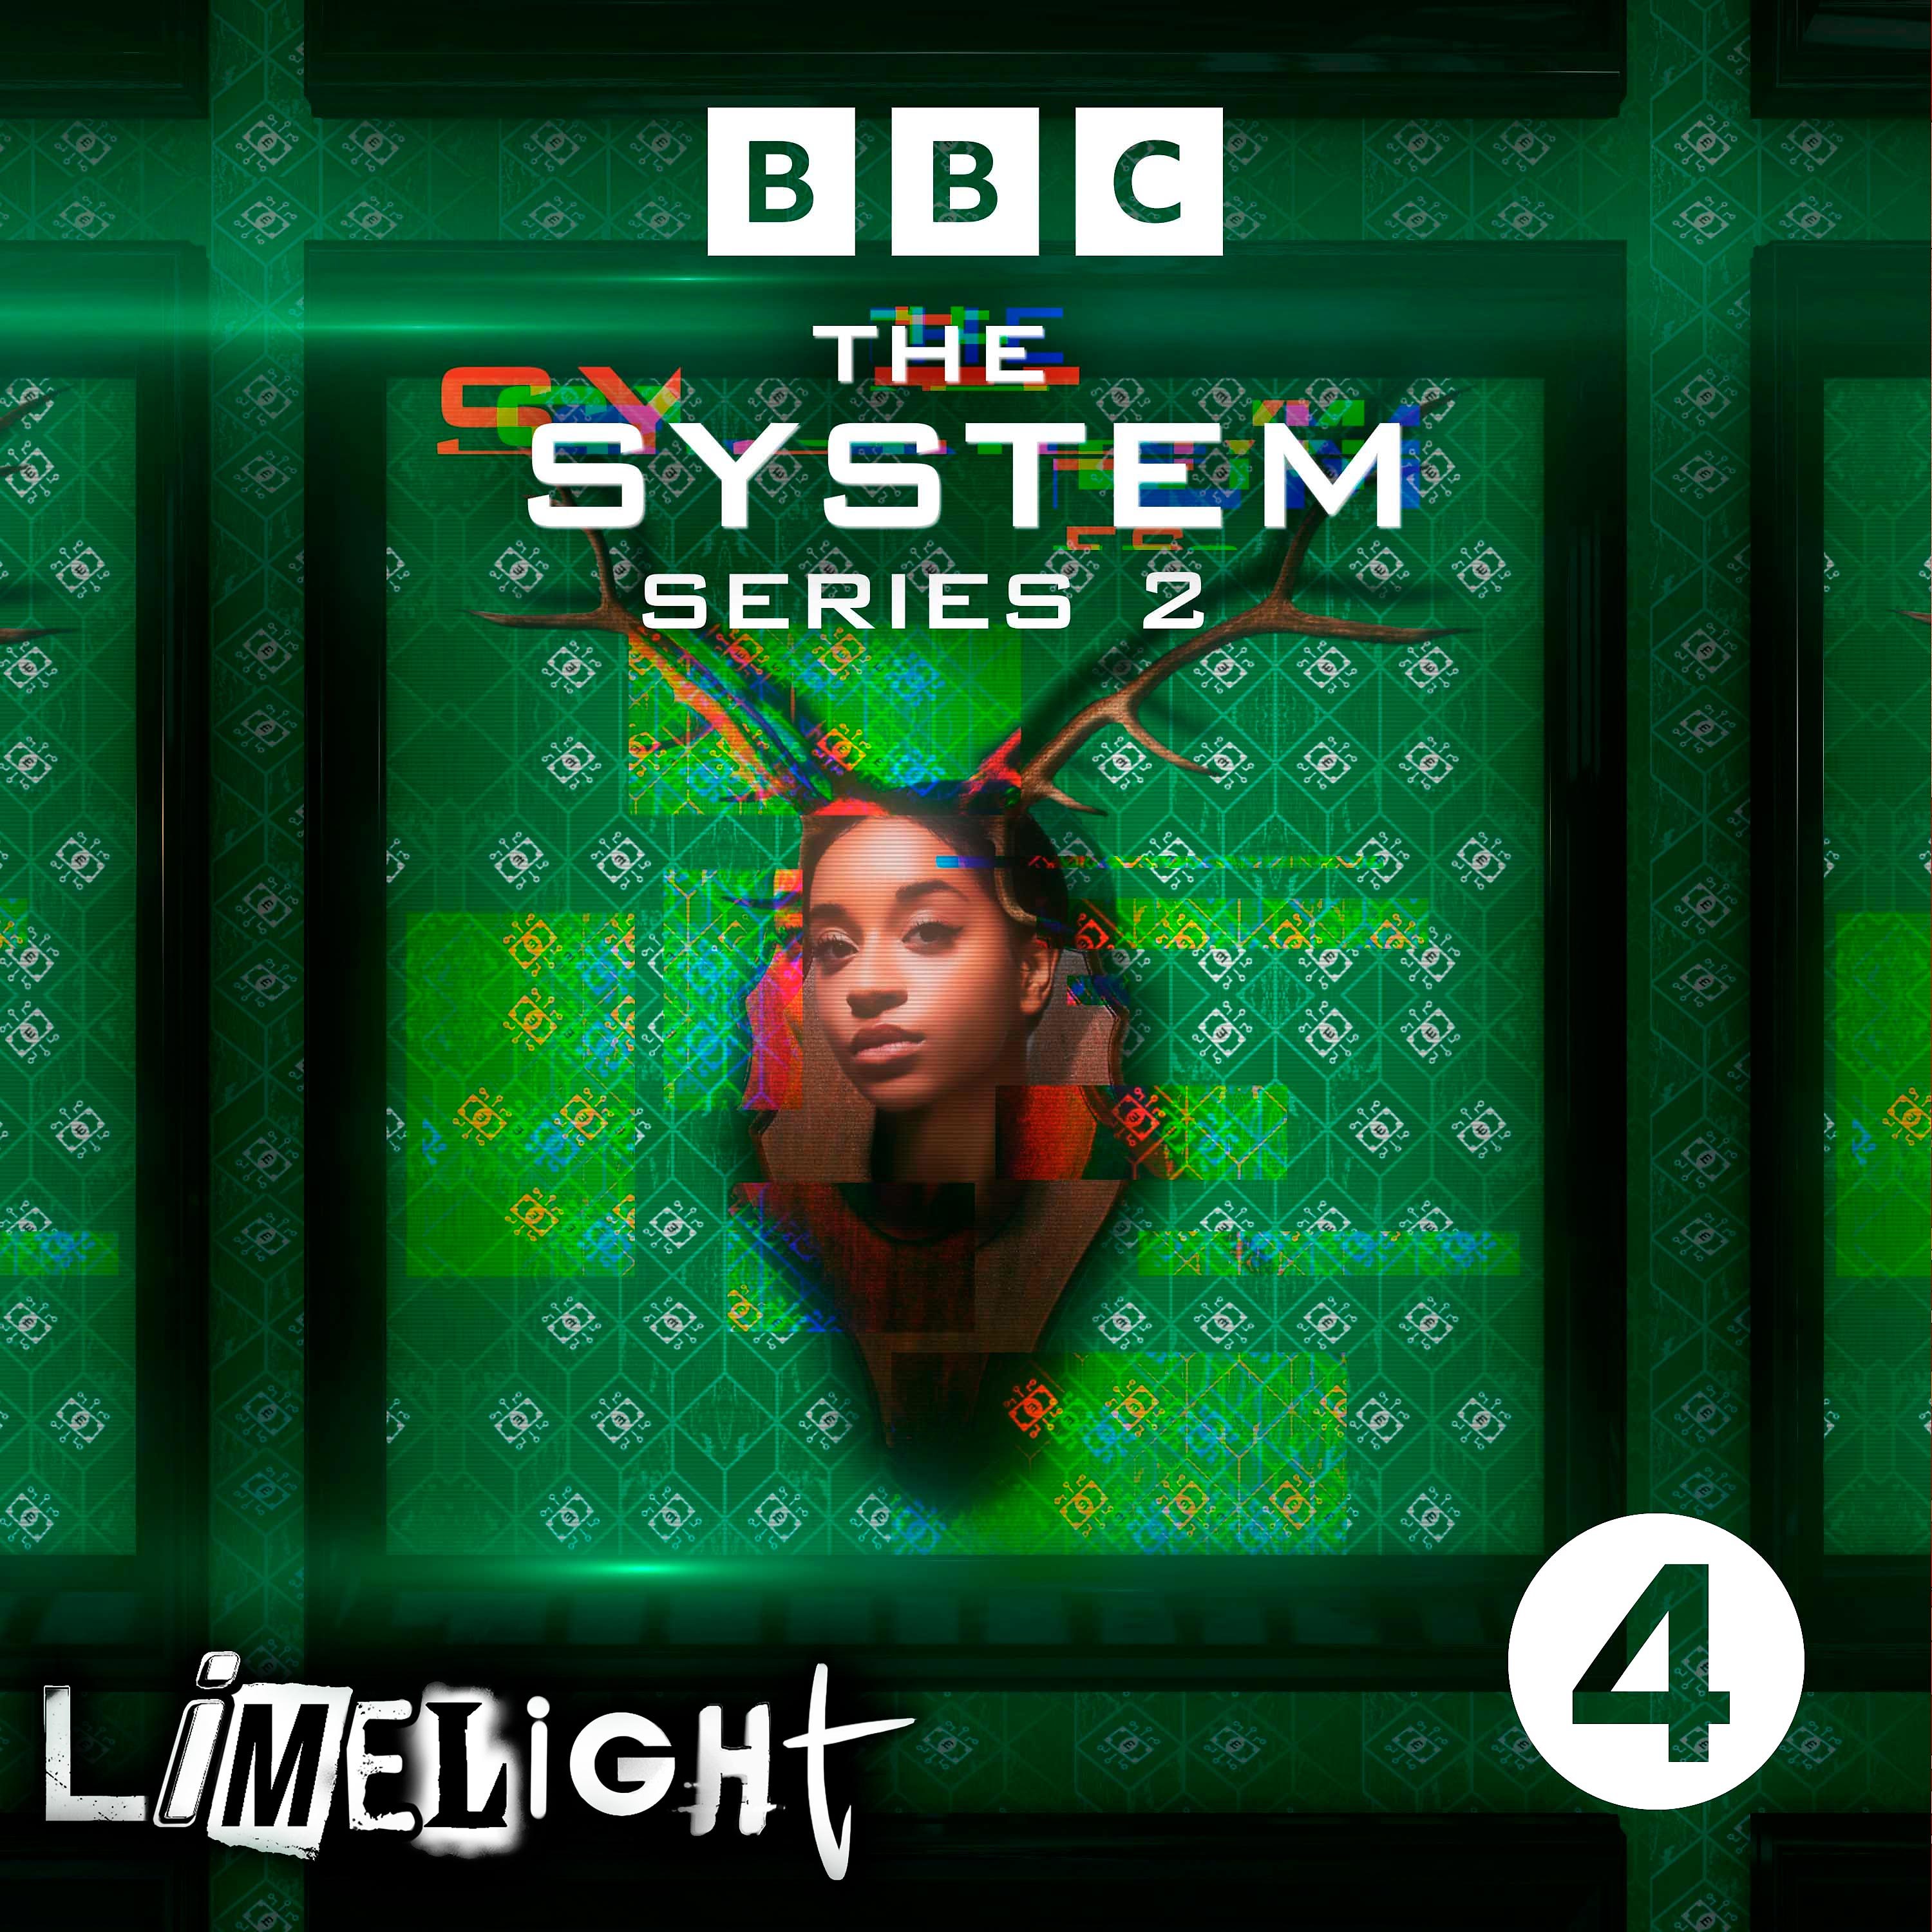 Introducing The System - Series 2